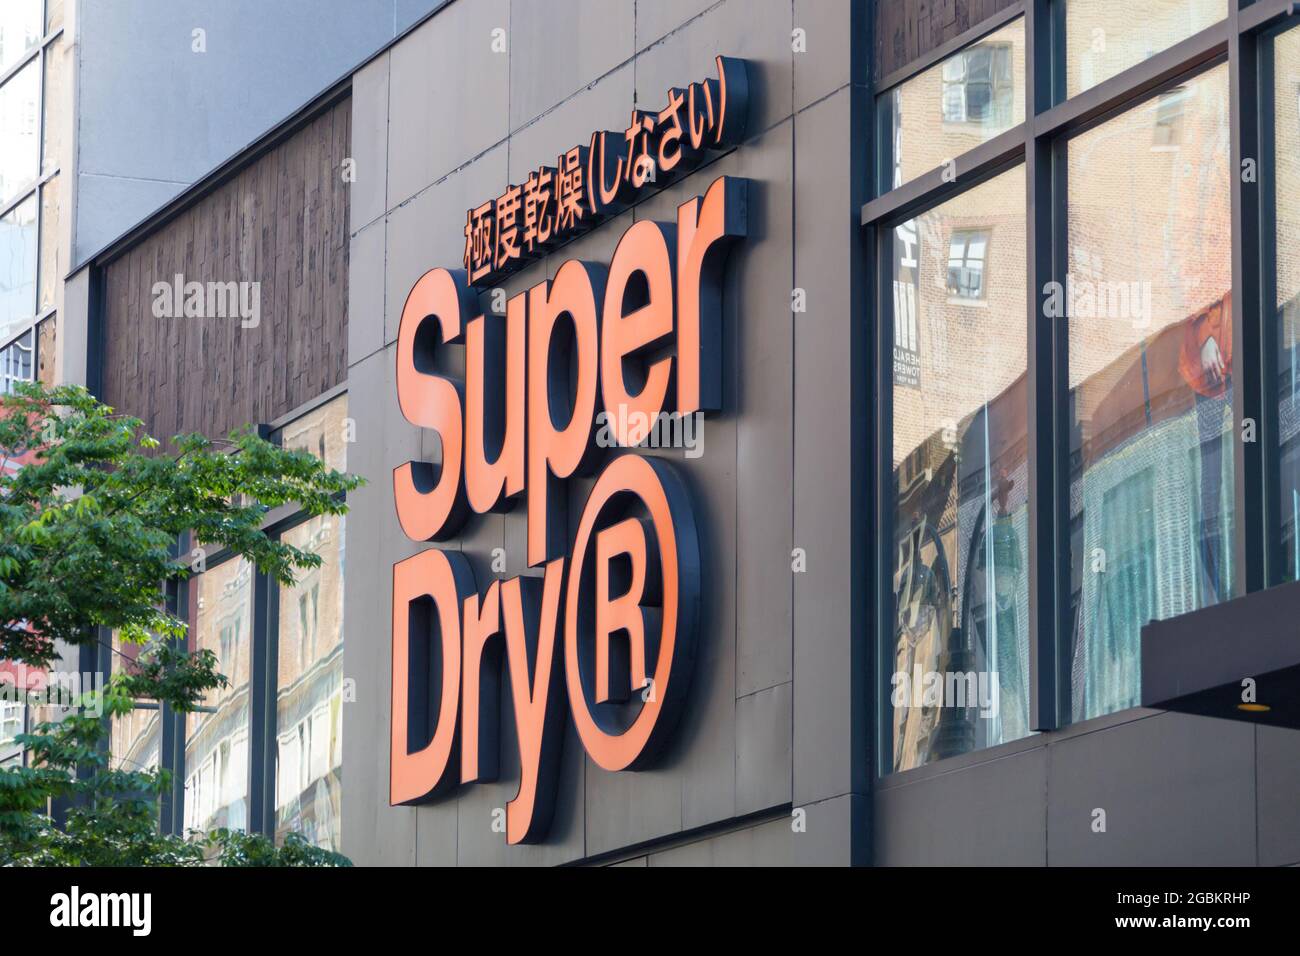 NEW YORK, USA - MAY 15, 2019: The Super Dry sign on the exterior of their  clothing store in New York. Superdry is part of Supergroup PLC, a British  Stock Photo - Alamy